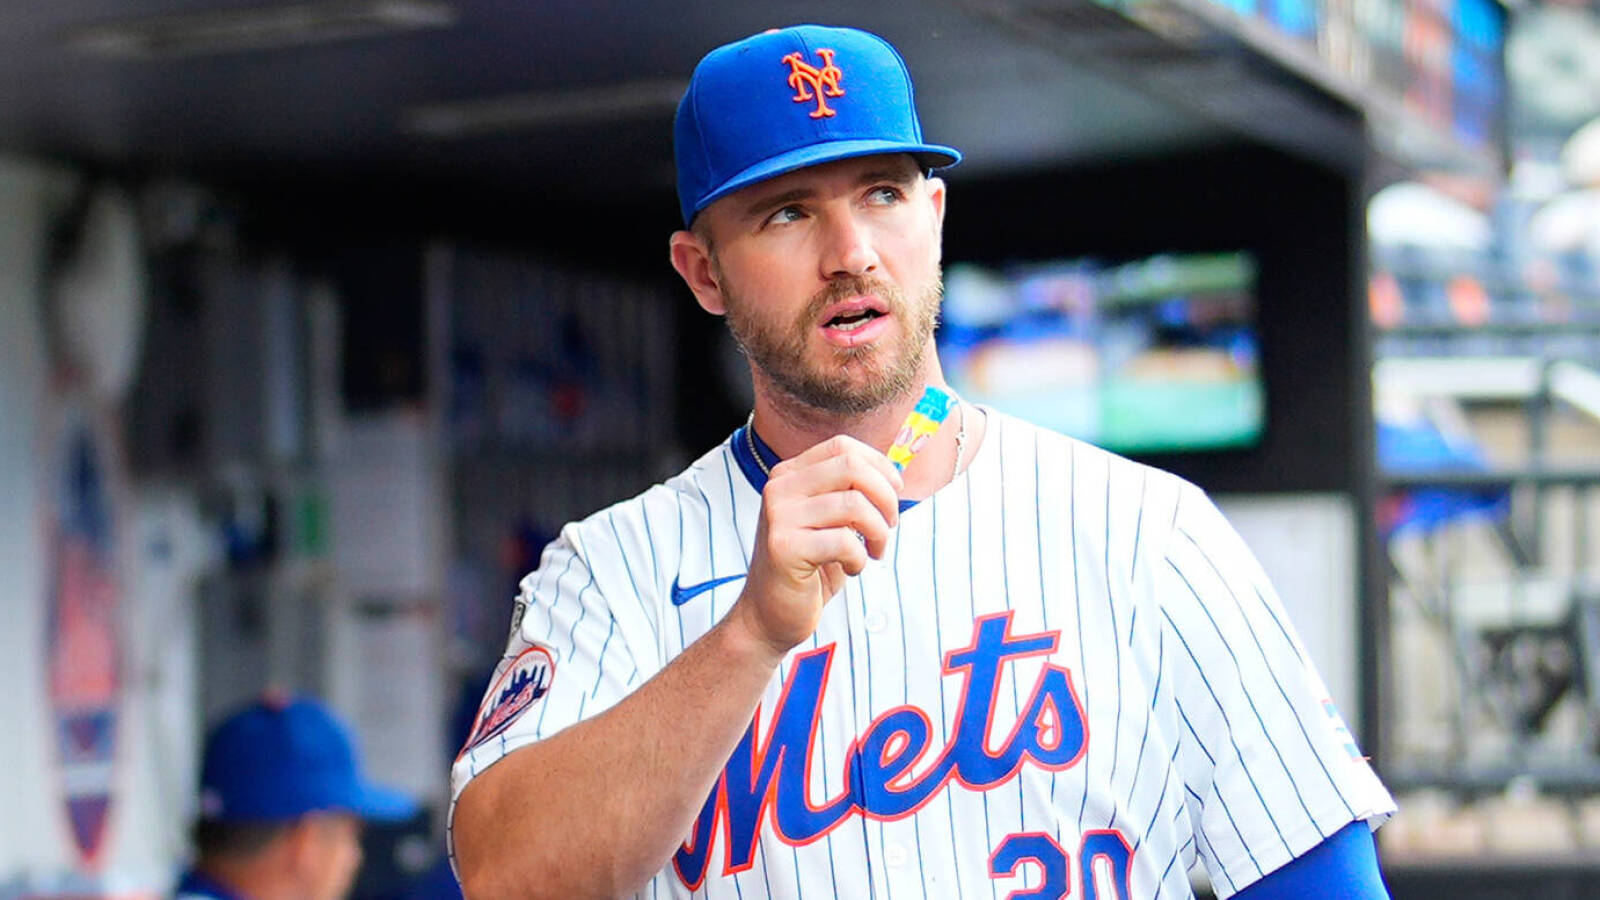 Insider shares confusing trade updates on Mets' Pete Alonso